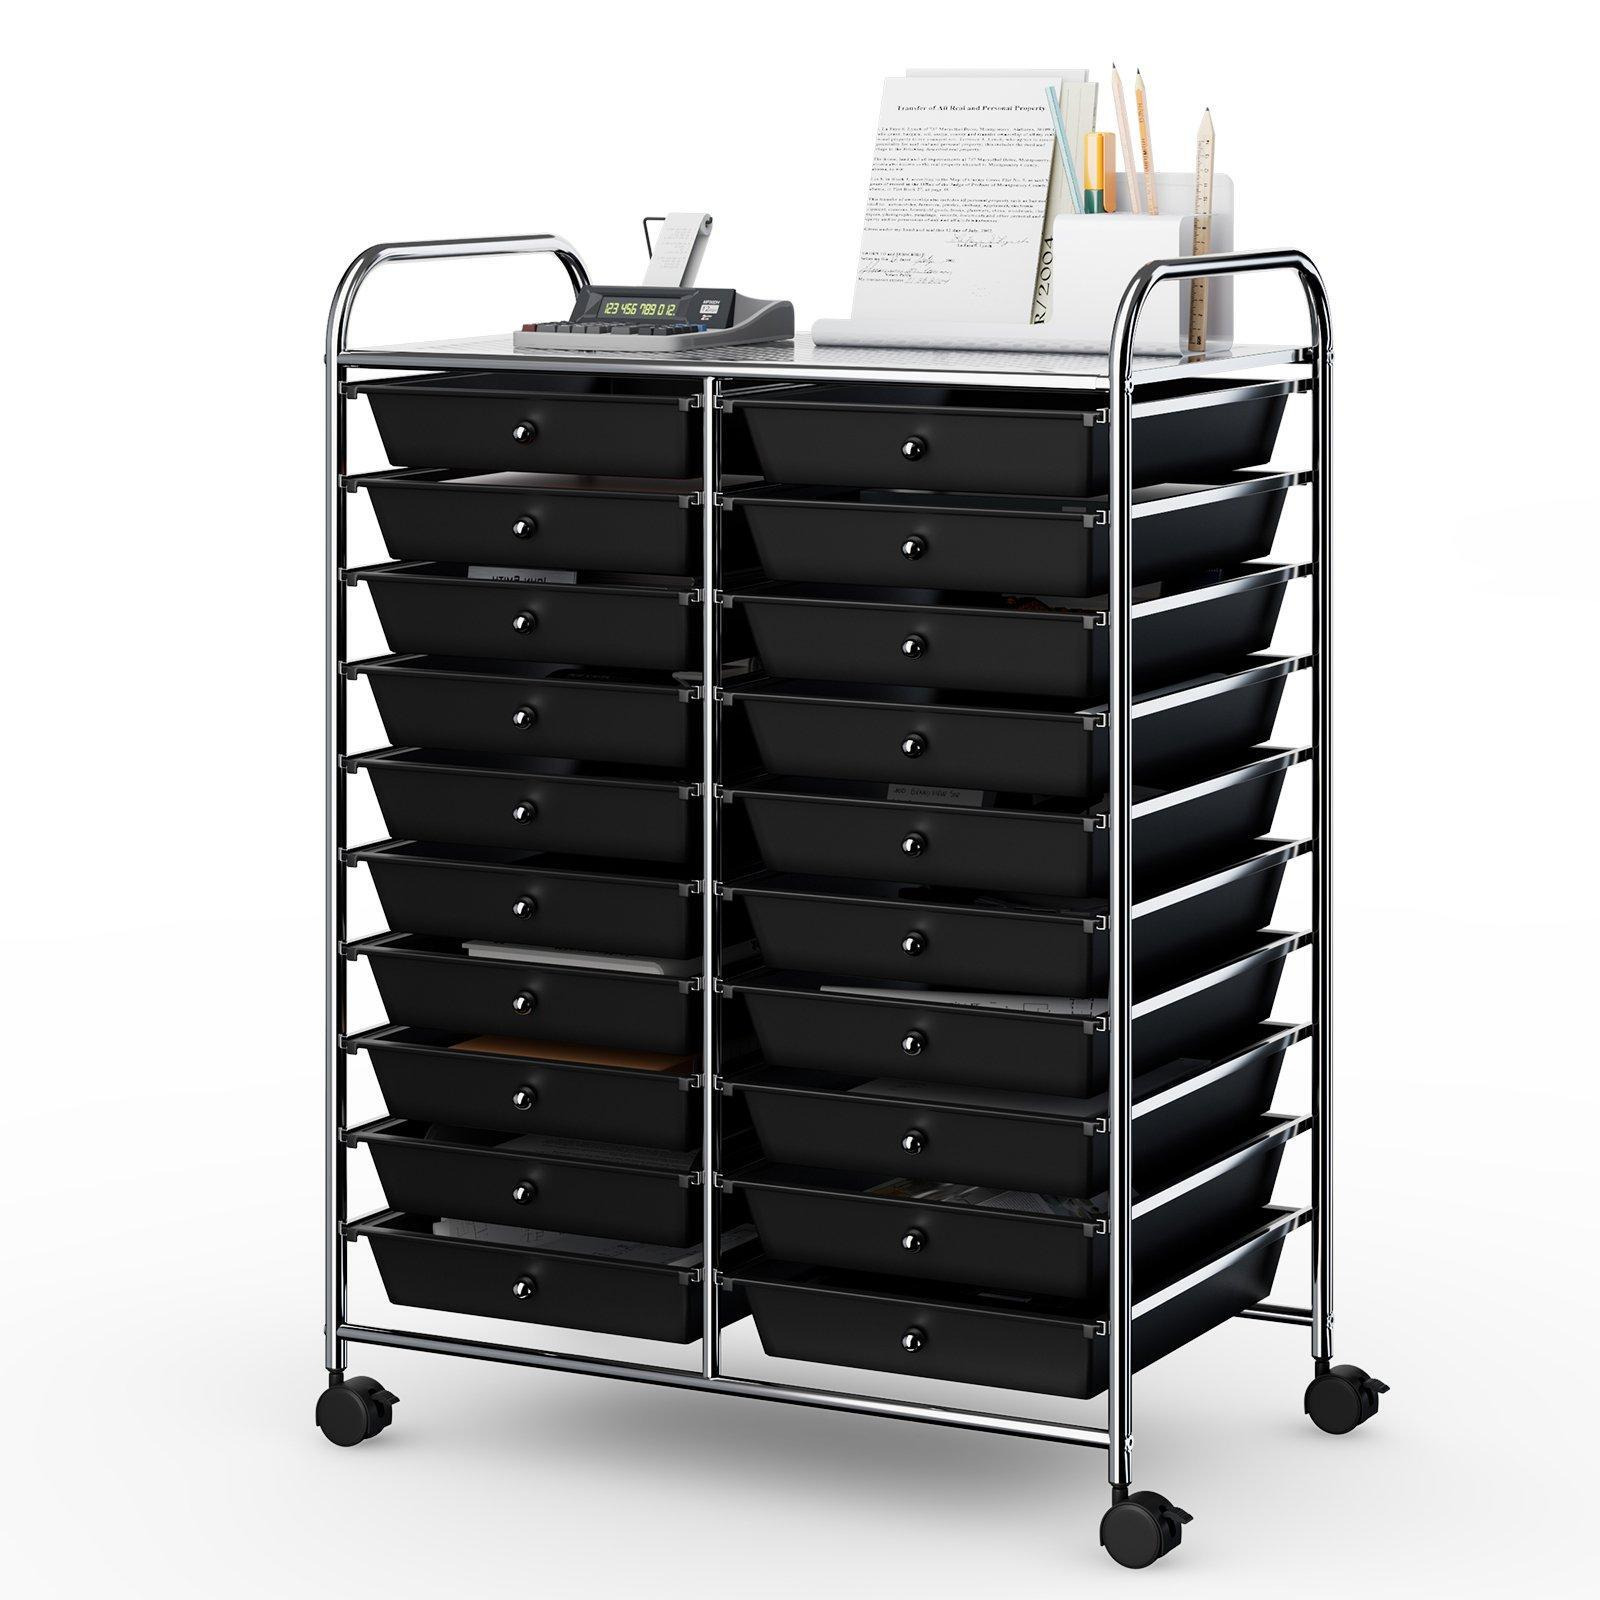 20 Drawers Storage Rolling Cart Home Office Mobile Utility Trolley Organizer - image 1